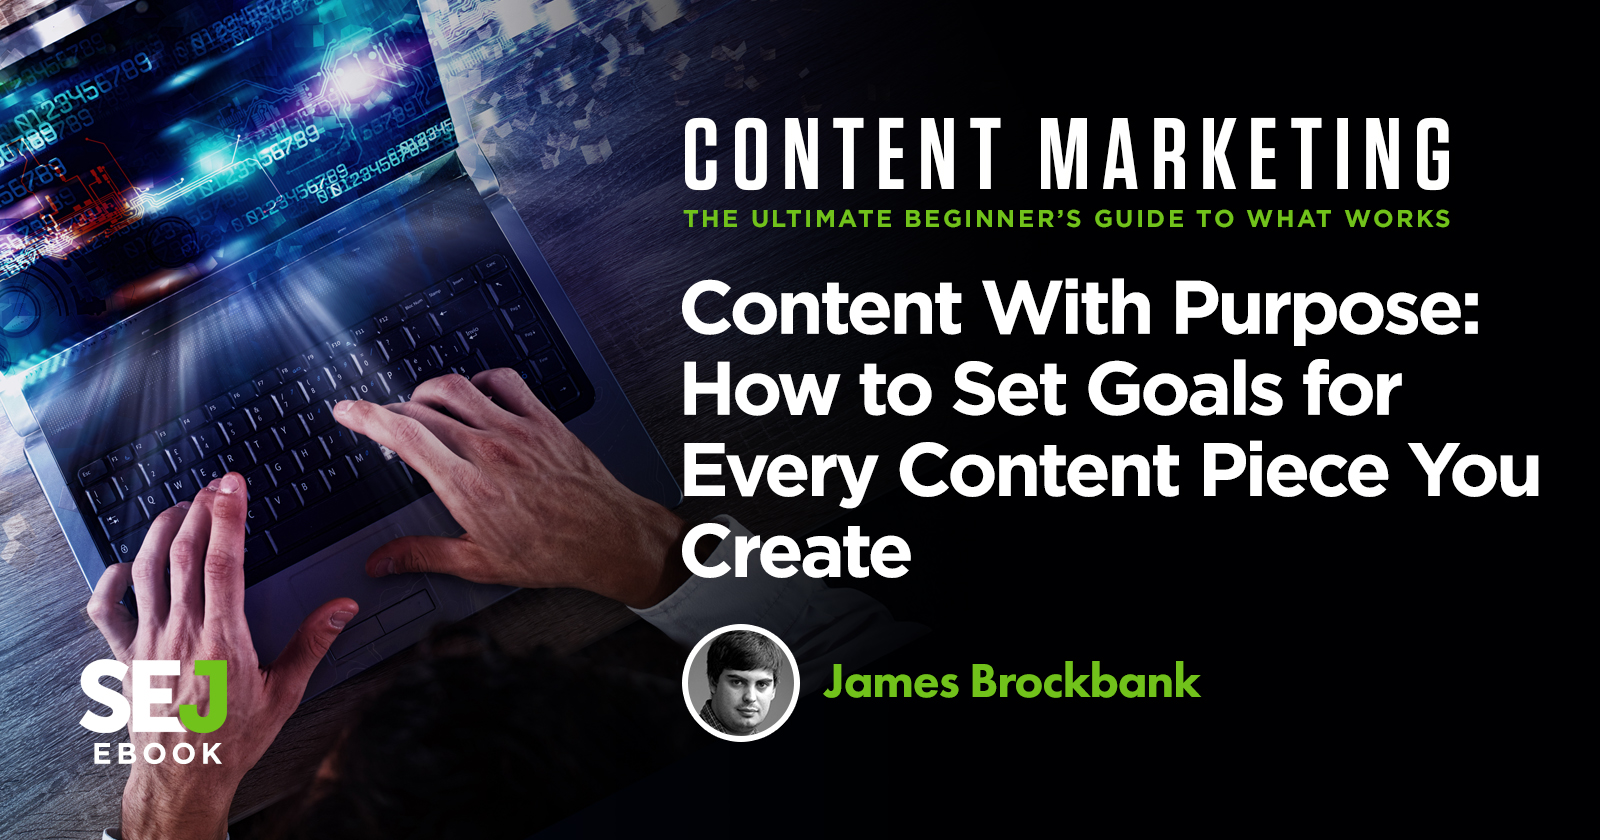 Content with Purpose How to Set Goals for Every Content Piece You Create